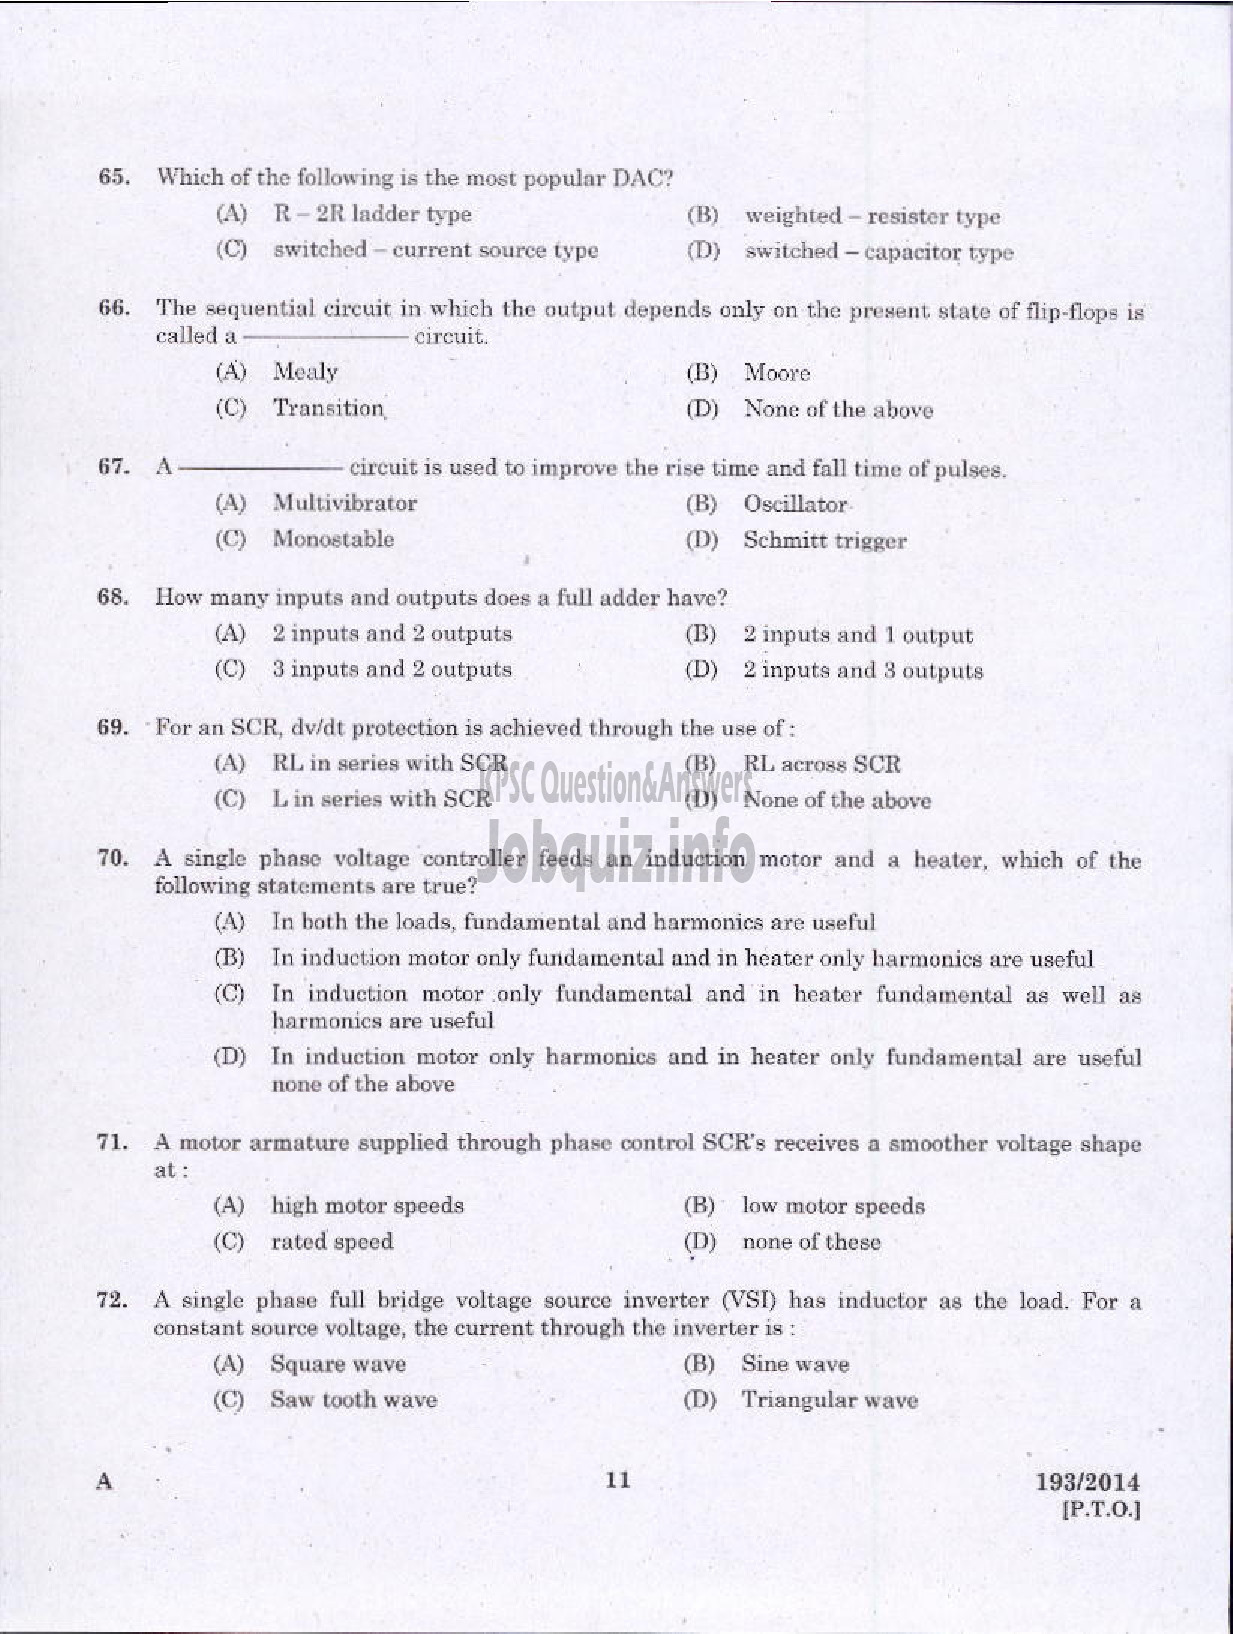 Kerala PSC Question Paper - ASSISTANT ENGINEER ELECTRICAL DIRECT AND BY TRANSFER KSEB-9